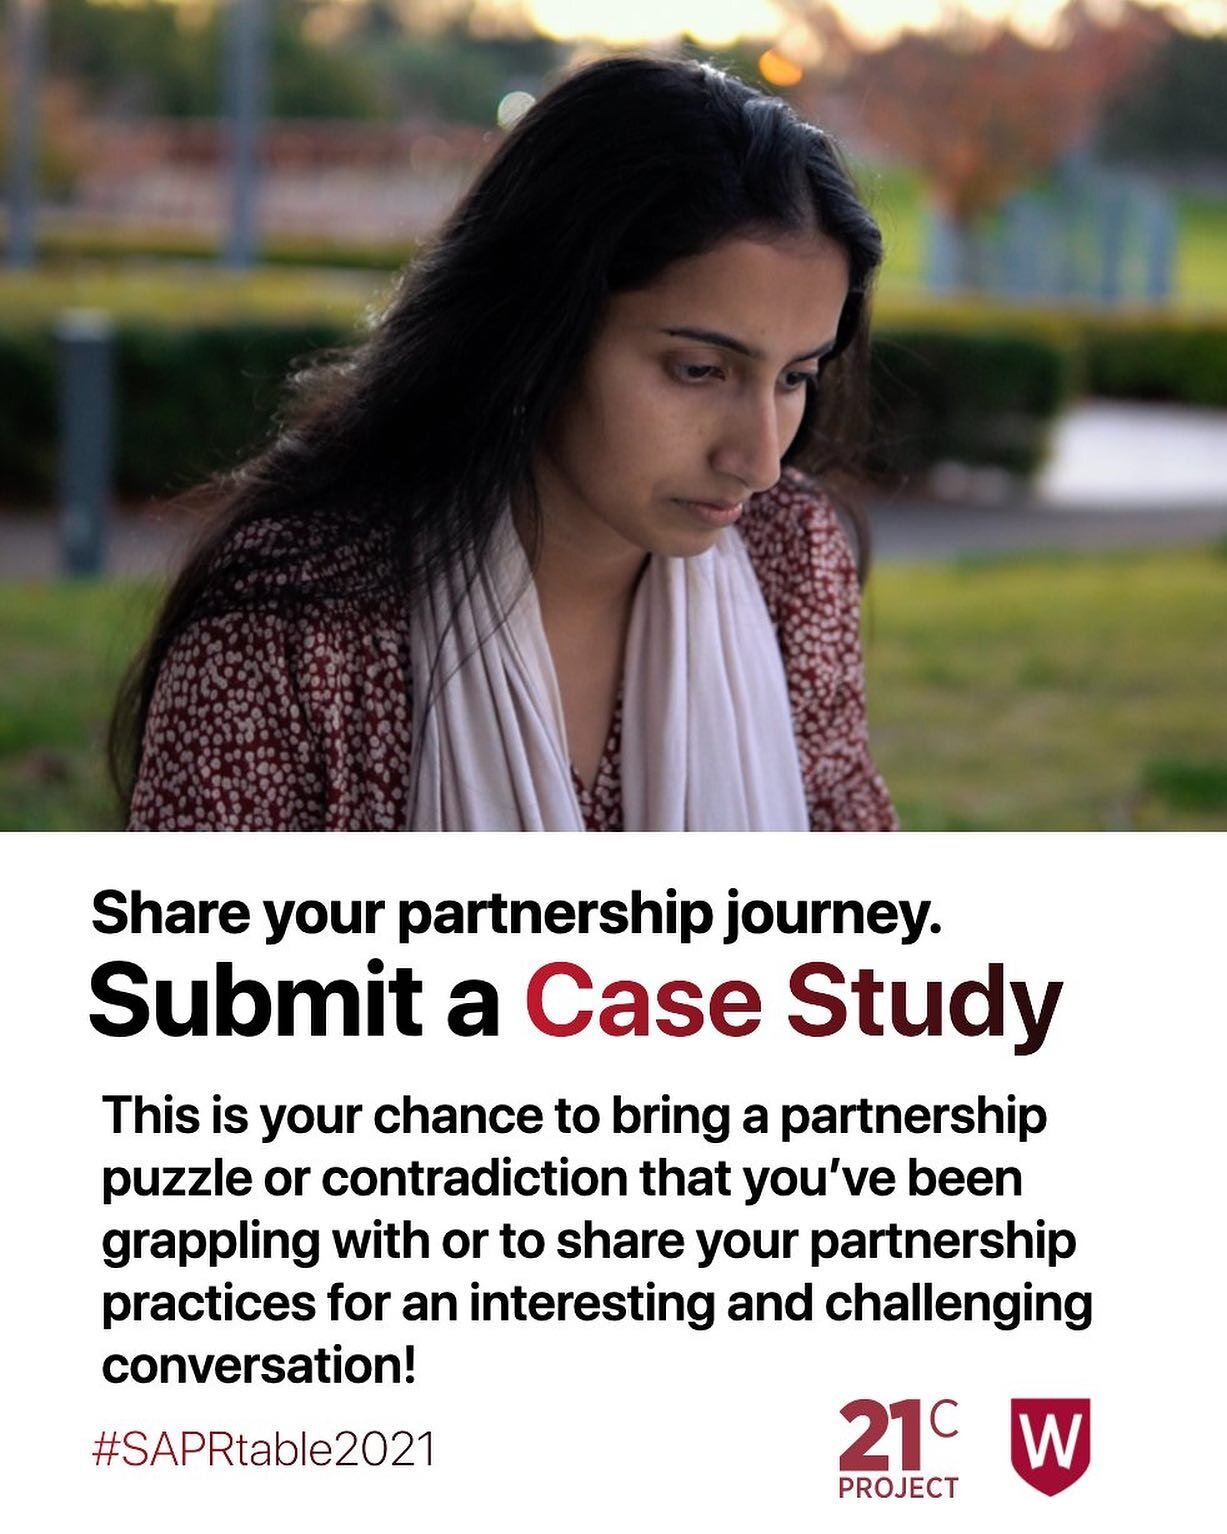 It&rsquo;s time to submit a case study! As you all know WSU SAP&rsquo;s are hosting the Roundtable and are giving you the opportunity to submit a case study - look at the link in the bio for more info. Submit by 1st Oct